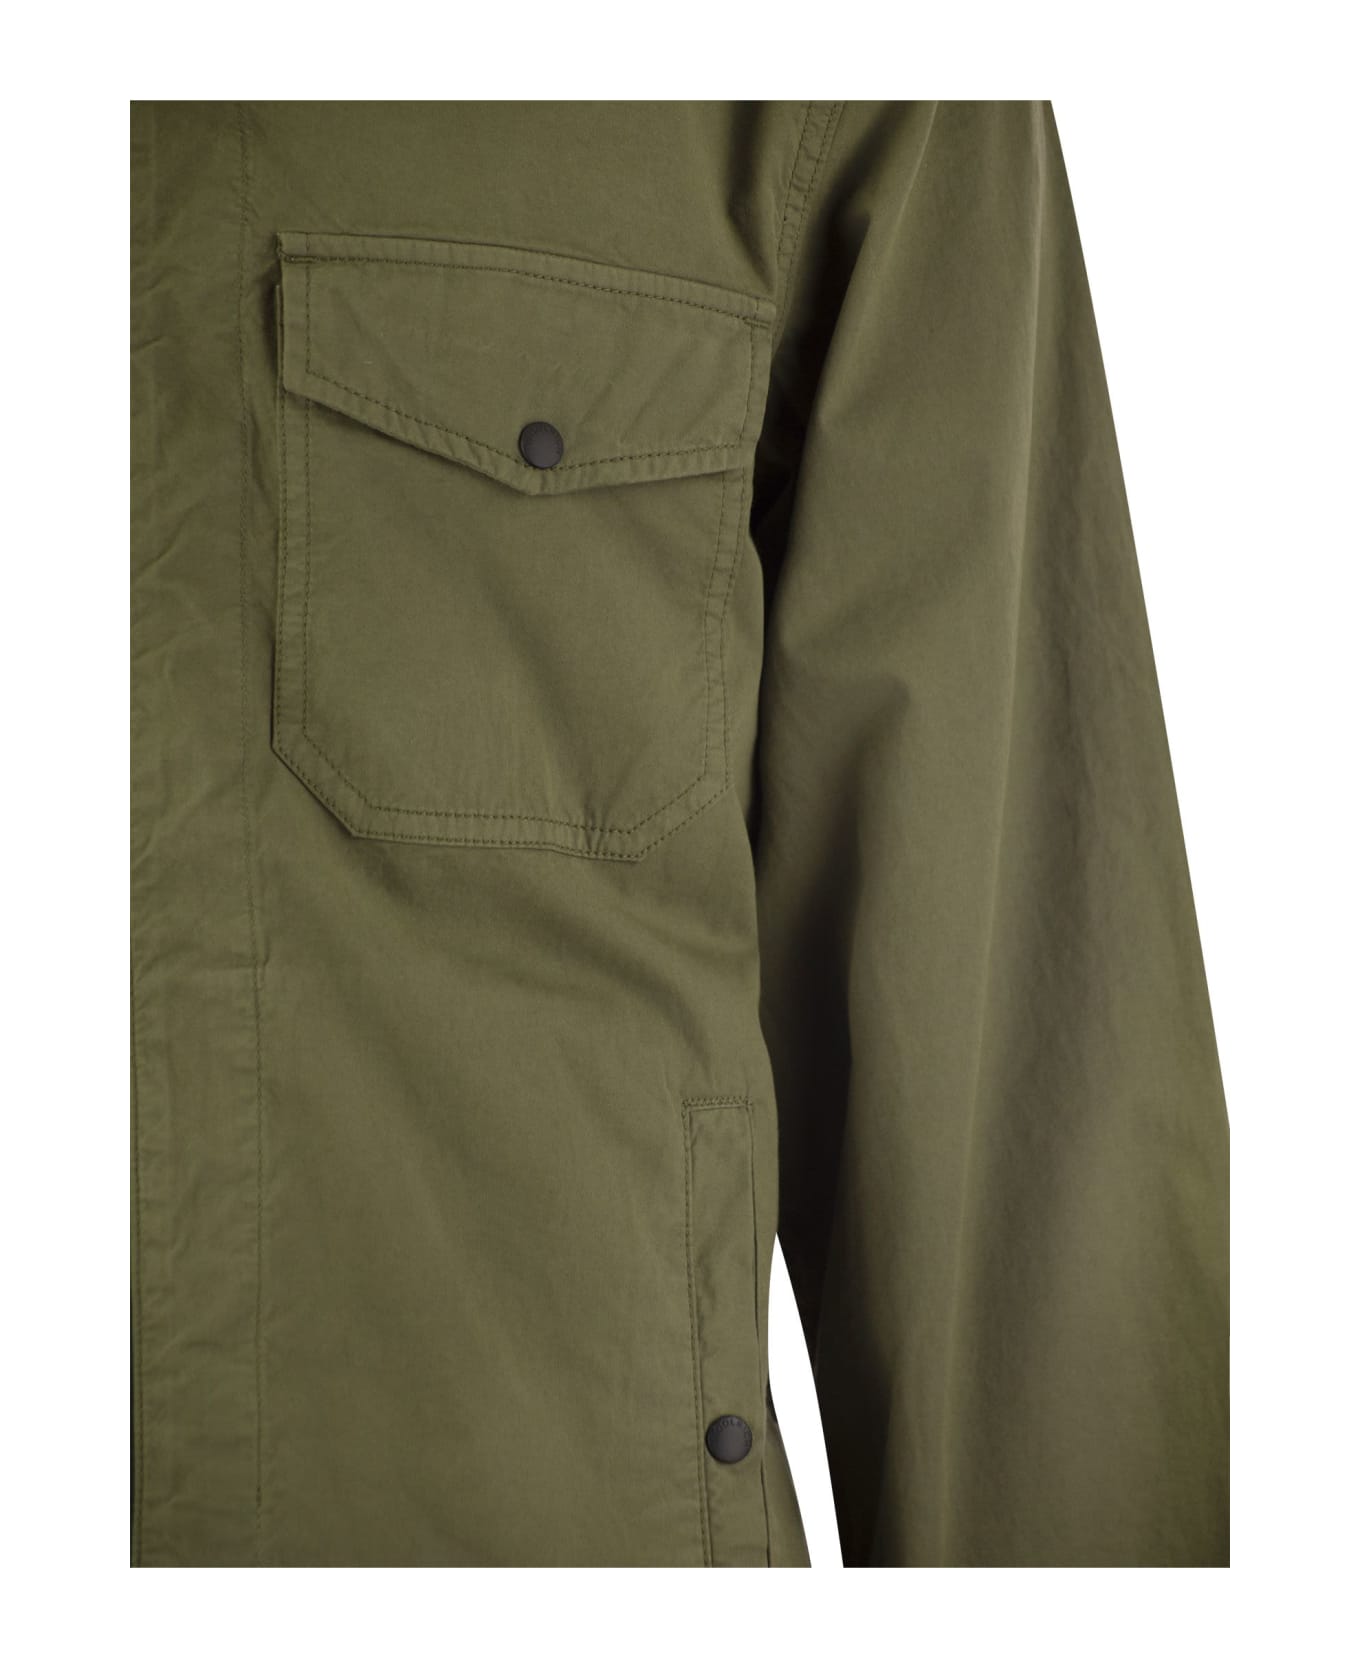 Woolrich Cotton Overshirt - Olive